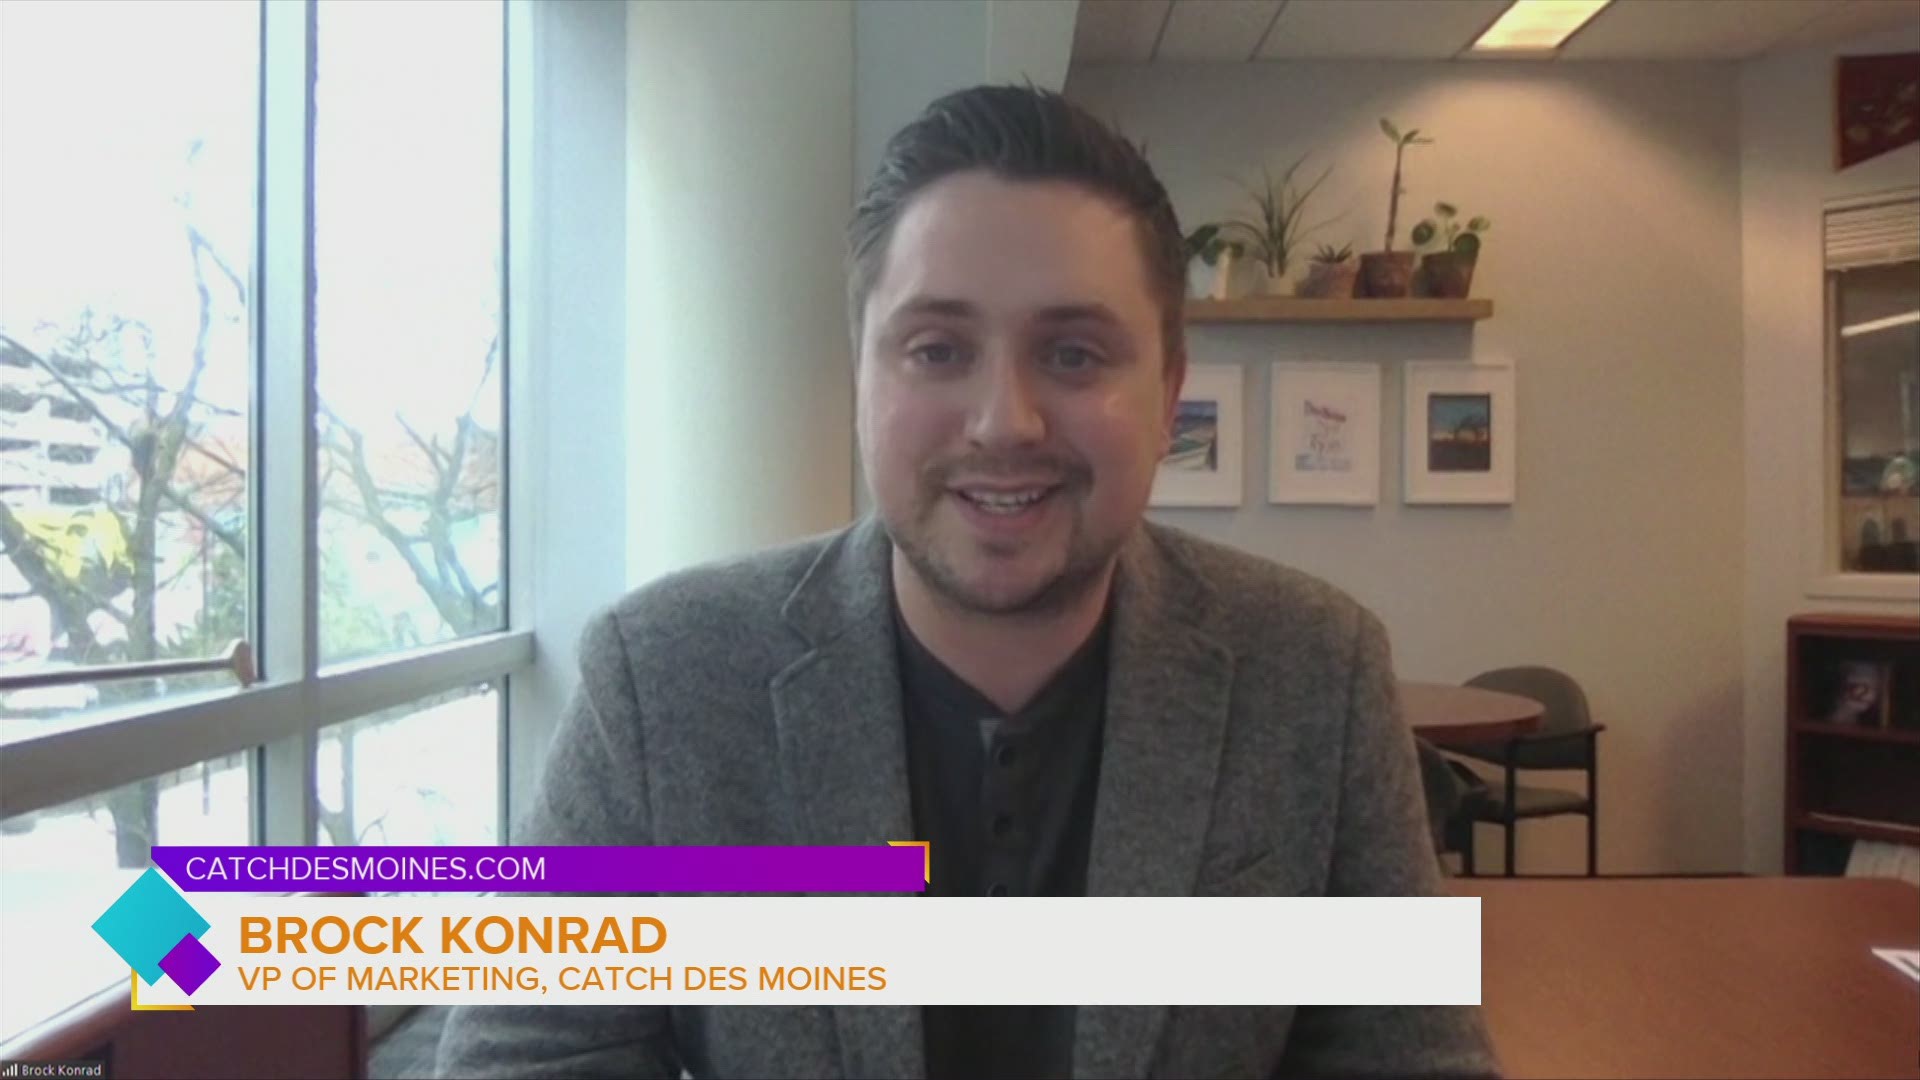 Brock Konrad from Catch Des Moines gets us caught up on some of the great activities coming to Des Moines this weekend! He also talks about the handy CATCH LIST!